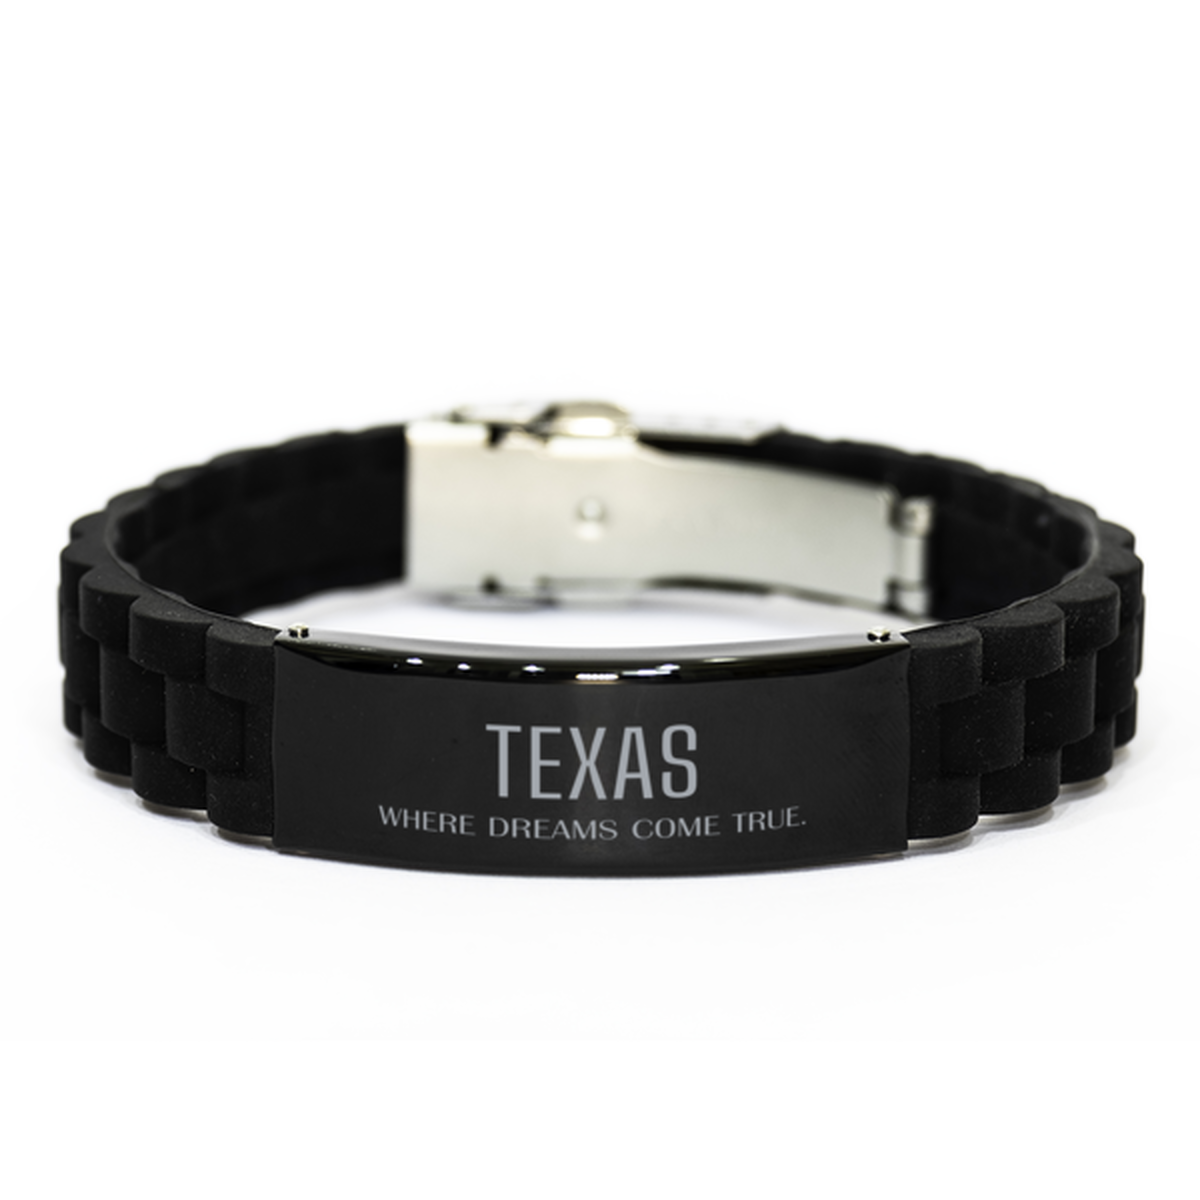 Love Texas State Black Glidelock Clasp Bracelet, Texas Where dreams come true, Birthday Inspirational Gifts For Texas Men, Women, Friends